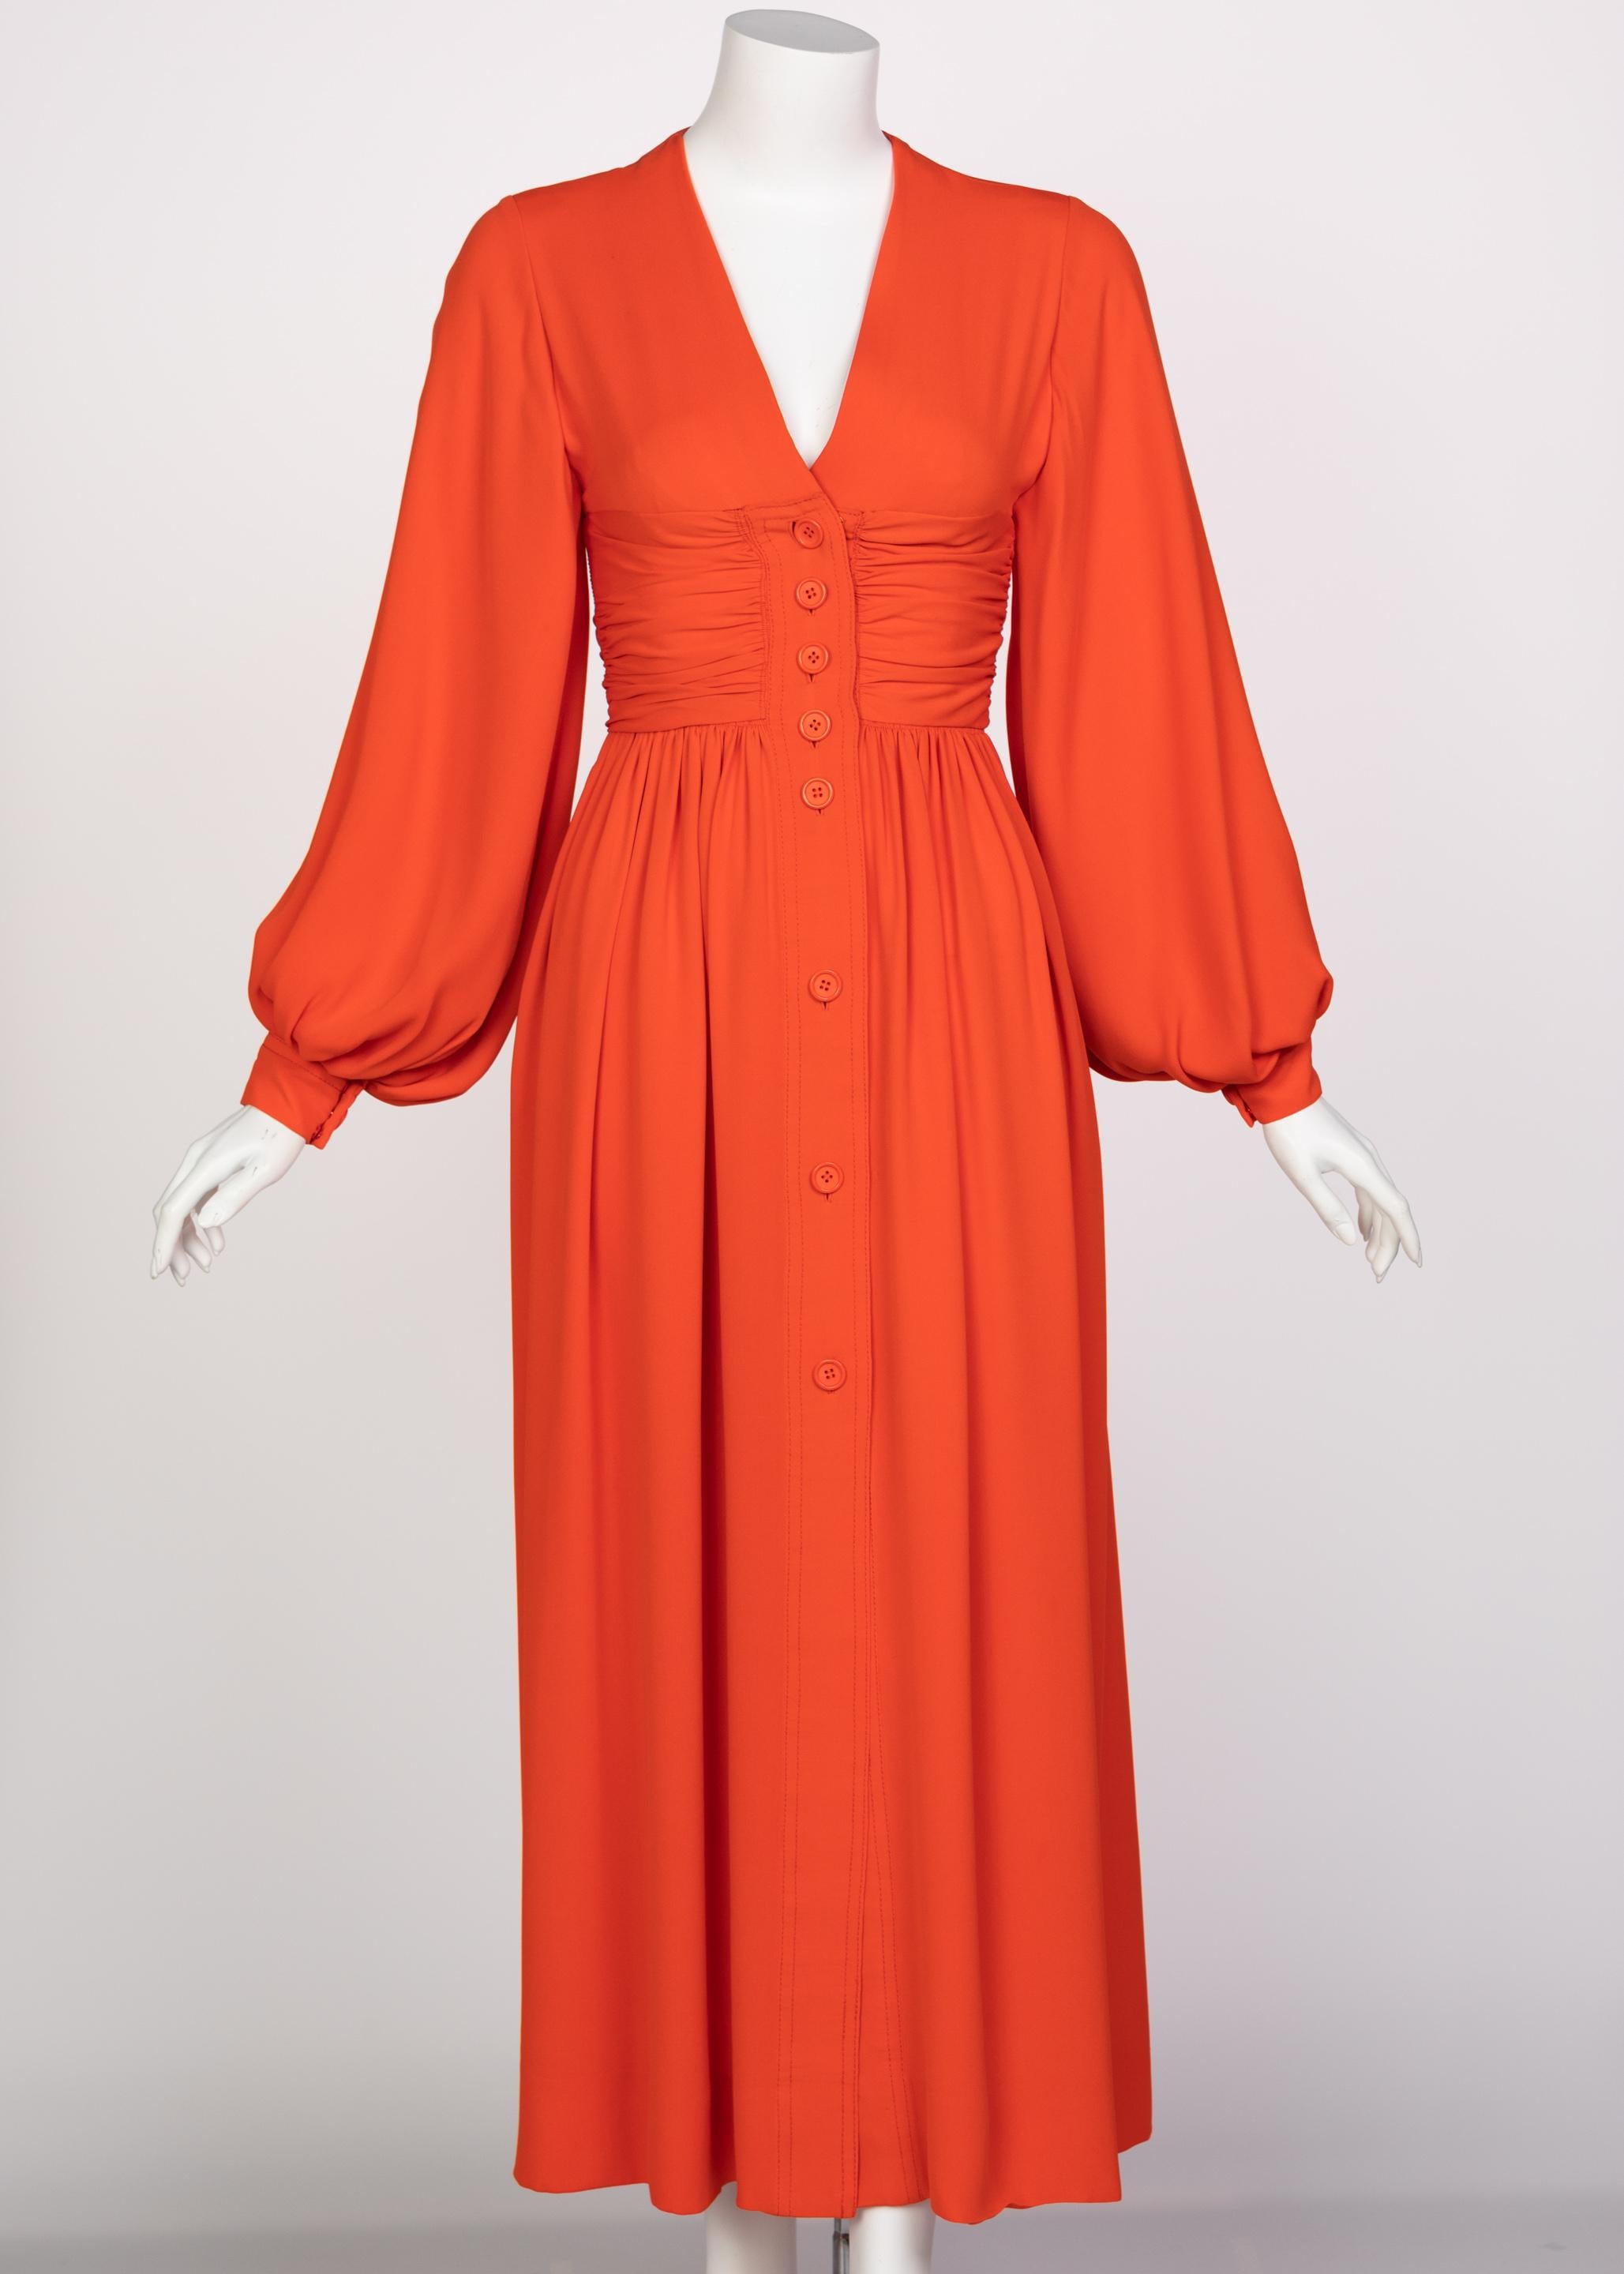 James Galanos is widely revered as one of the integral designers in shaping the so-called “American Look”. His designs evoked a sense of casual and effortless elegance that made his garments coveted by women across the social spectrum from the first